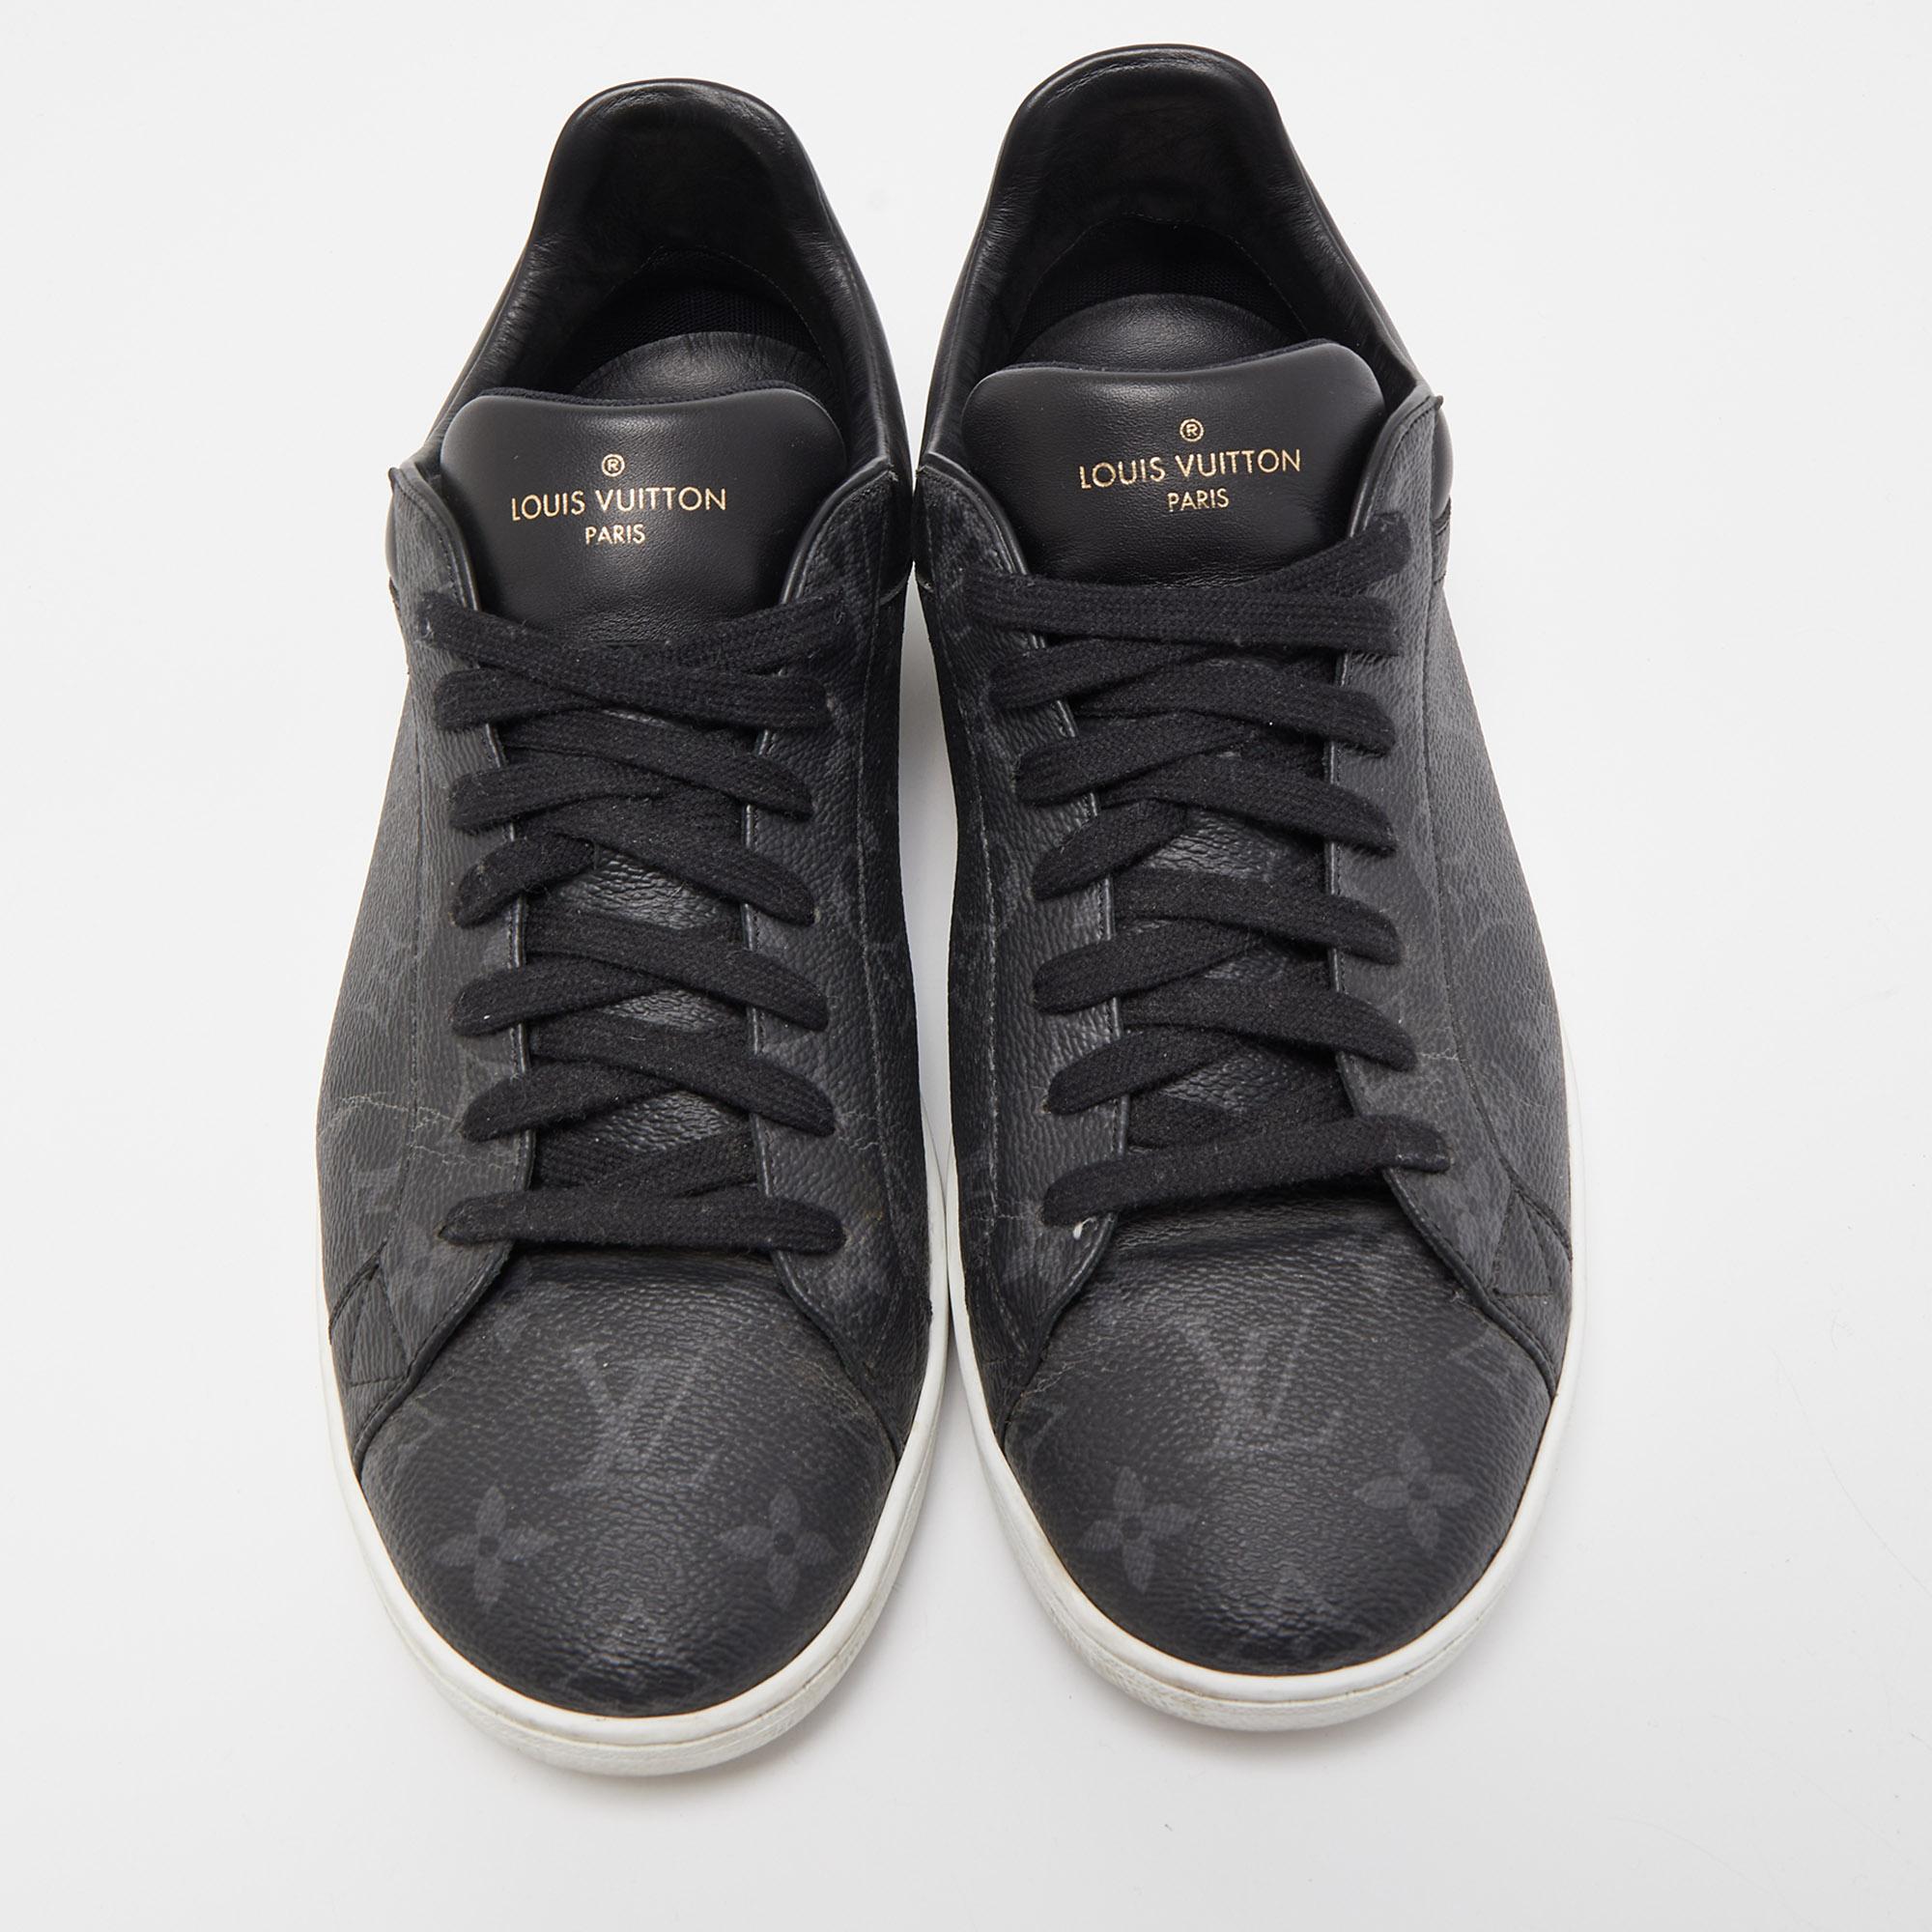 Coming in a classic silhouette, these designer sneakers are a seamless combination of luxury, comfort, and style. These sneakers are finished with signature details and comfortable insoles.

Includes: extra lace
